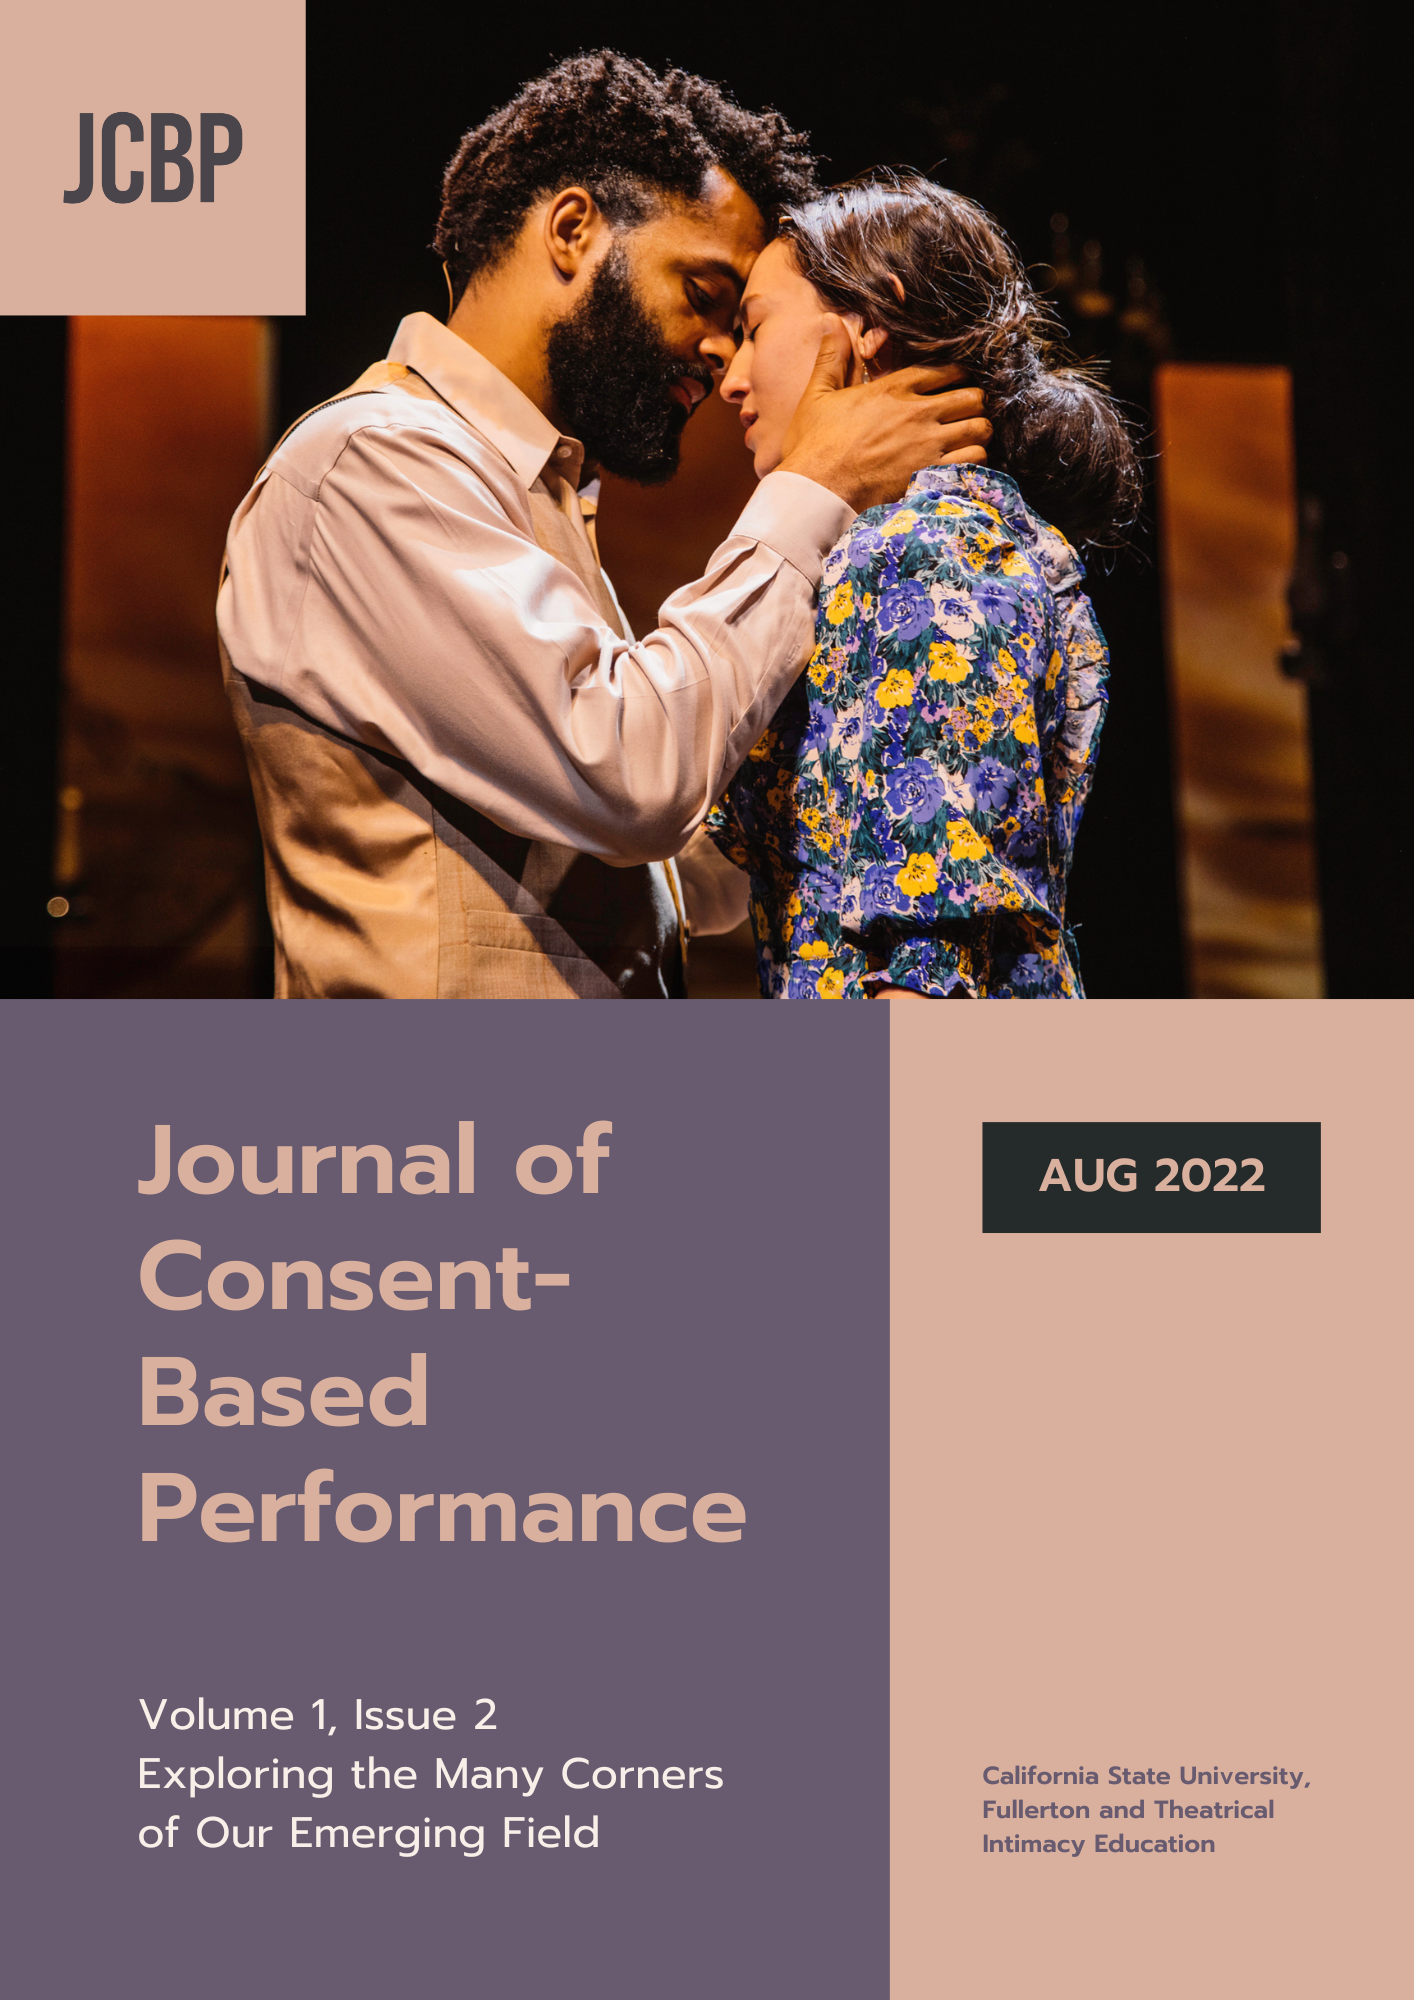 JCBP vol. 1 issue 2 cover features a photo of a Black actor in a cream shirt and tan vest closing distance to kiss an Asian actor with her hair in a low bun wearing a violet and yellow floral dress.